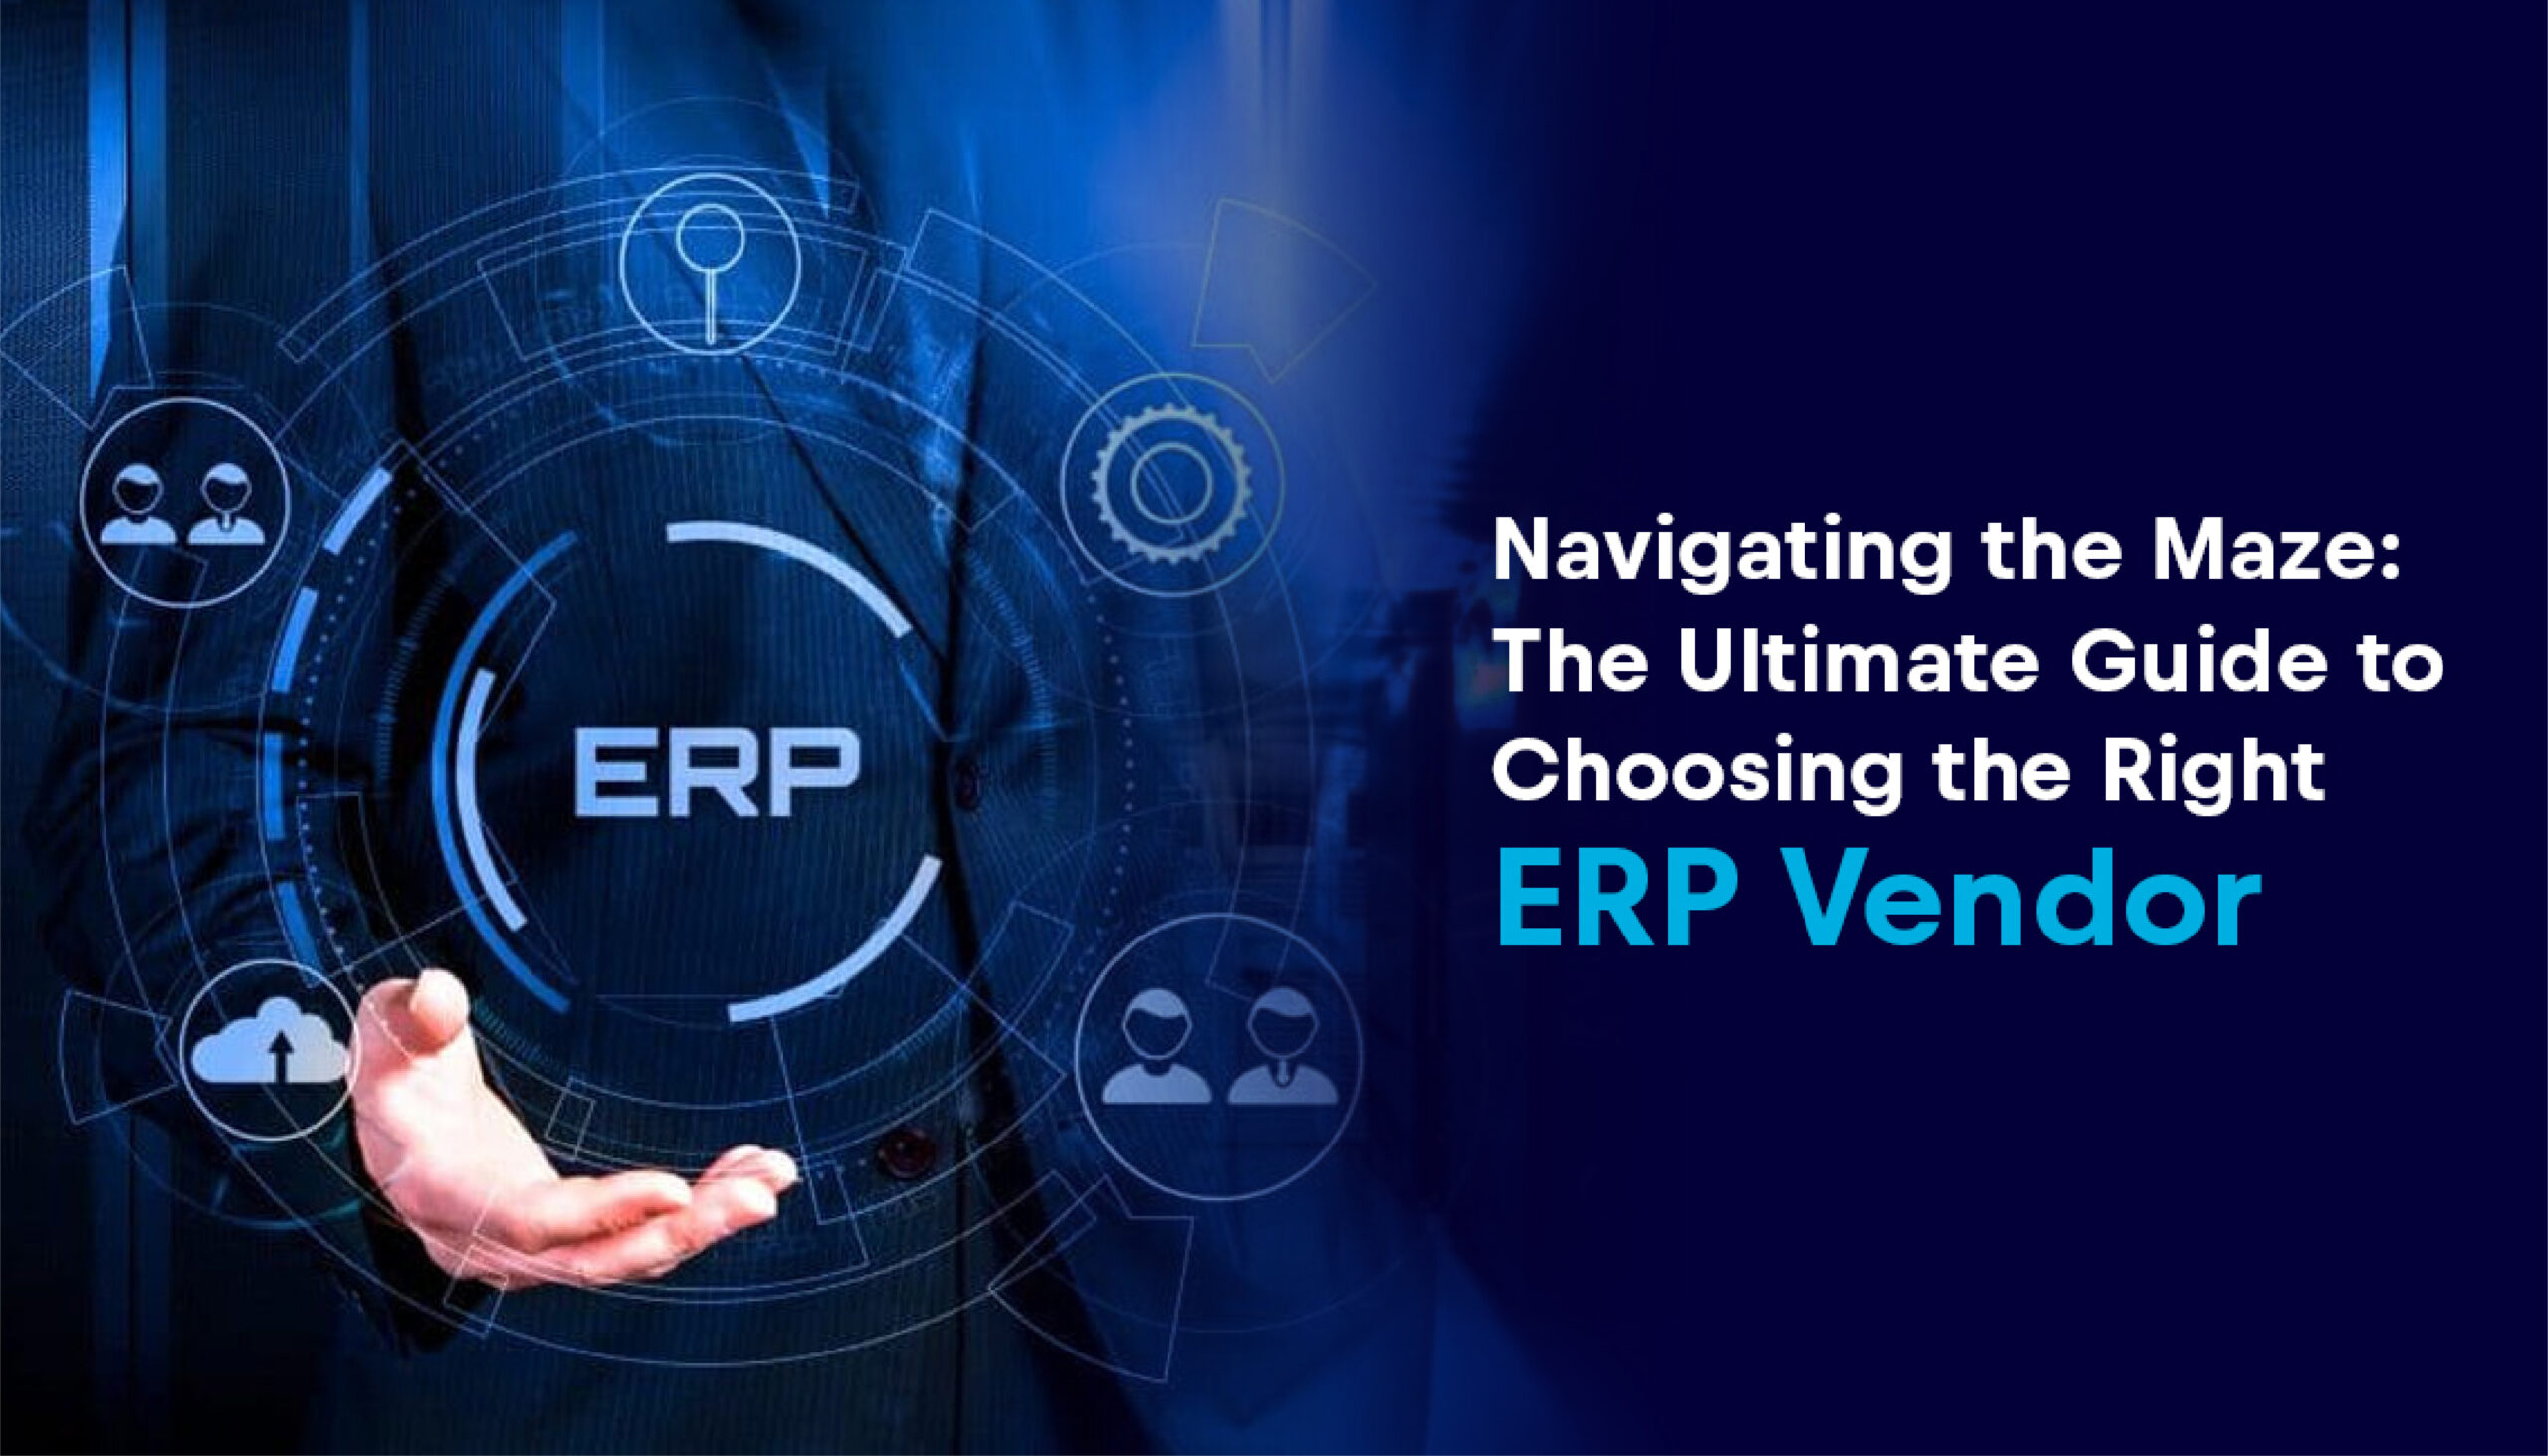 Navigating the Maze: The Ultimate Guide to Choosing the Right ERP Vendor